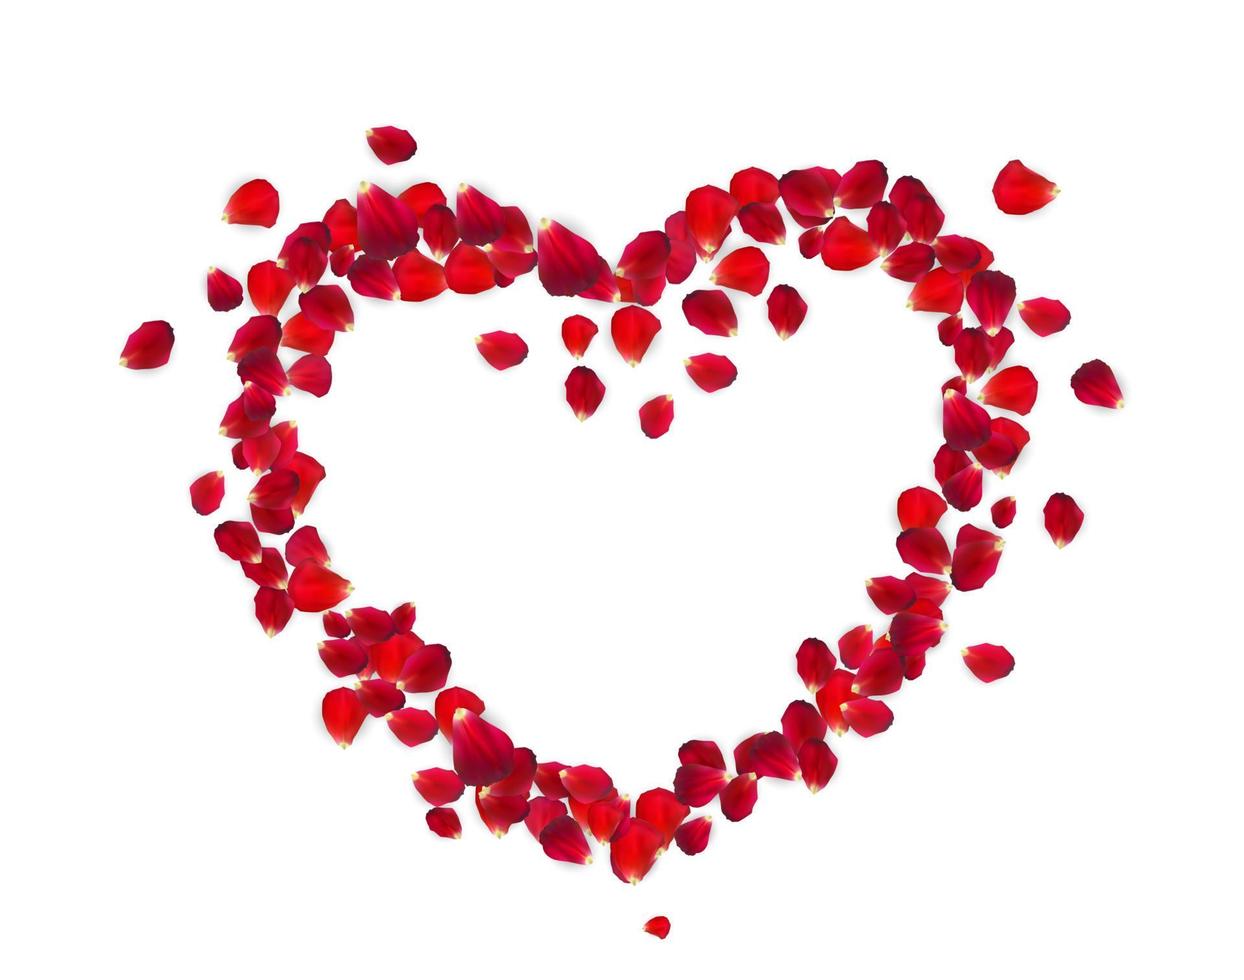 Heart Shape with Rose Petals isolated on whitetration. EPS10 vector